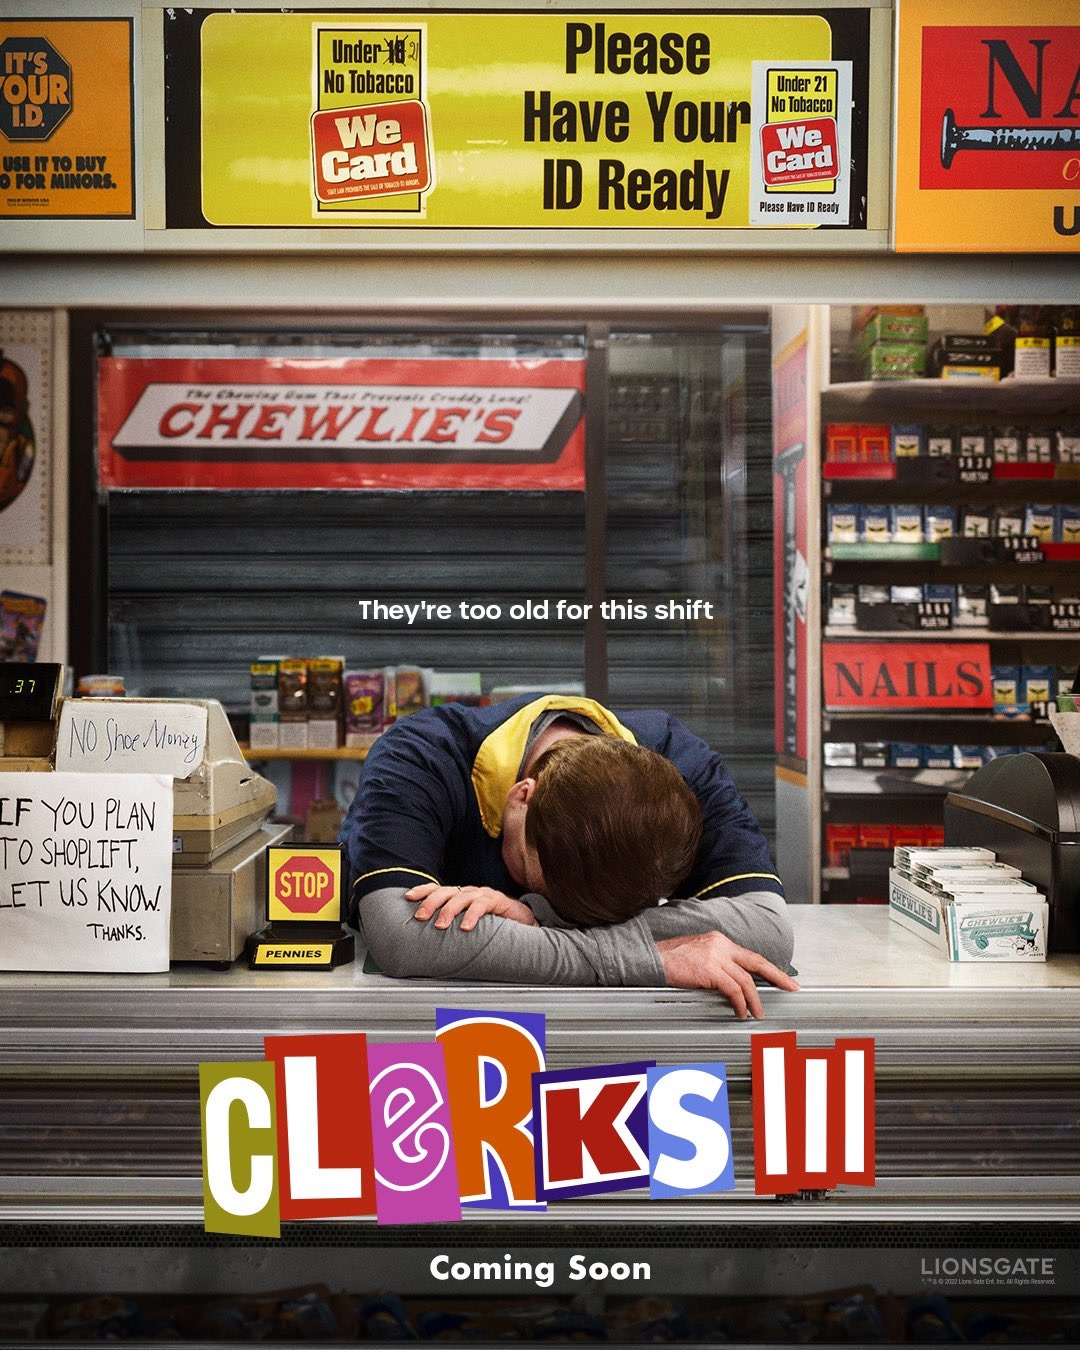 Movie the podcast Clerks 3